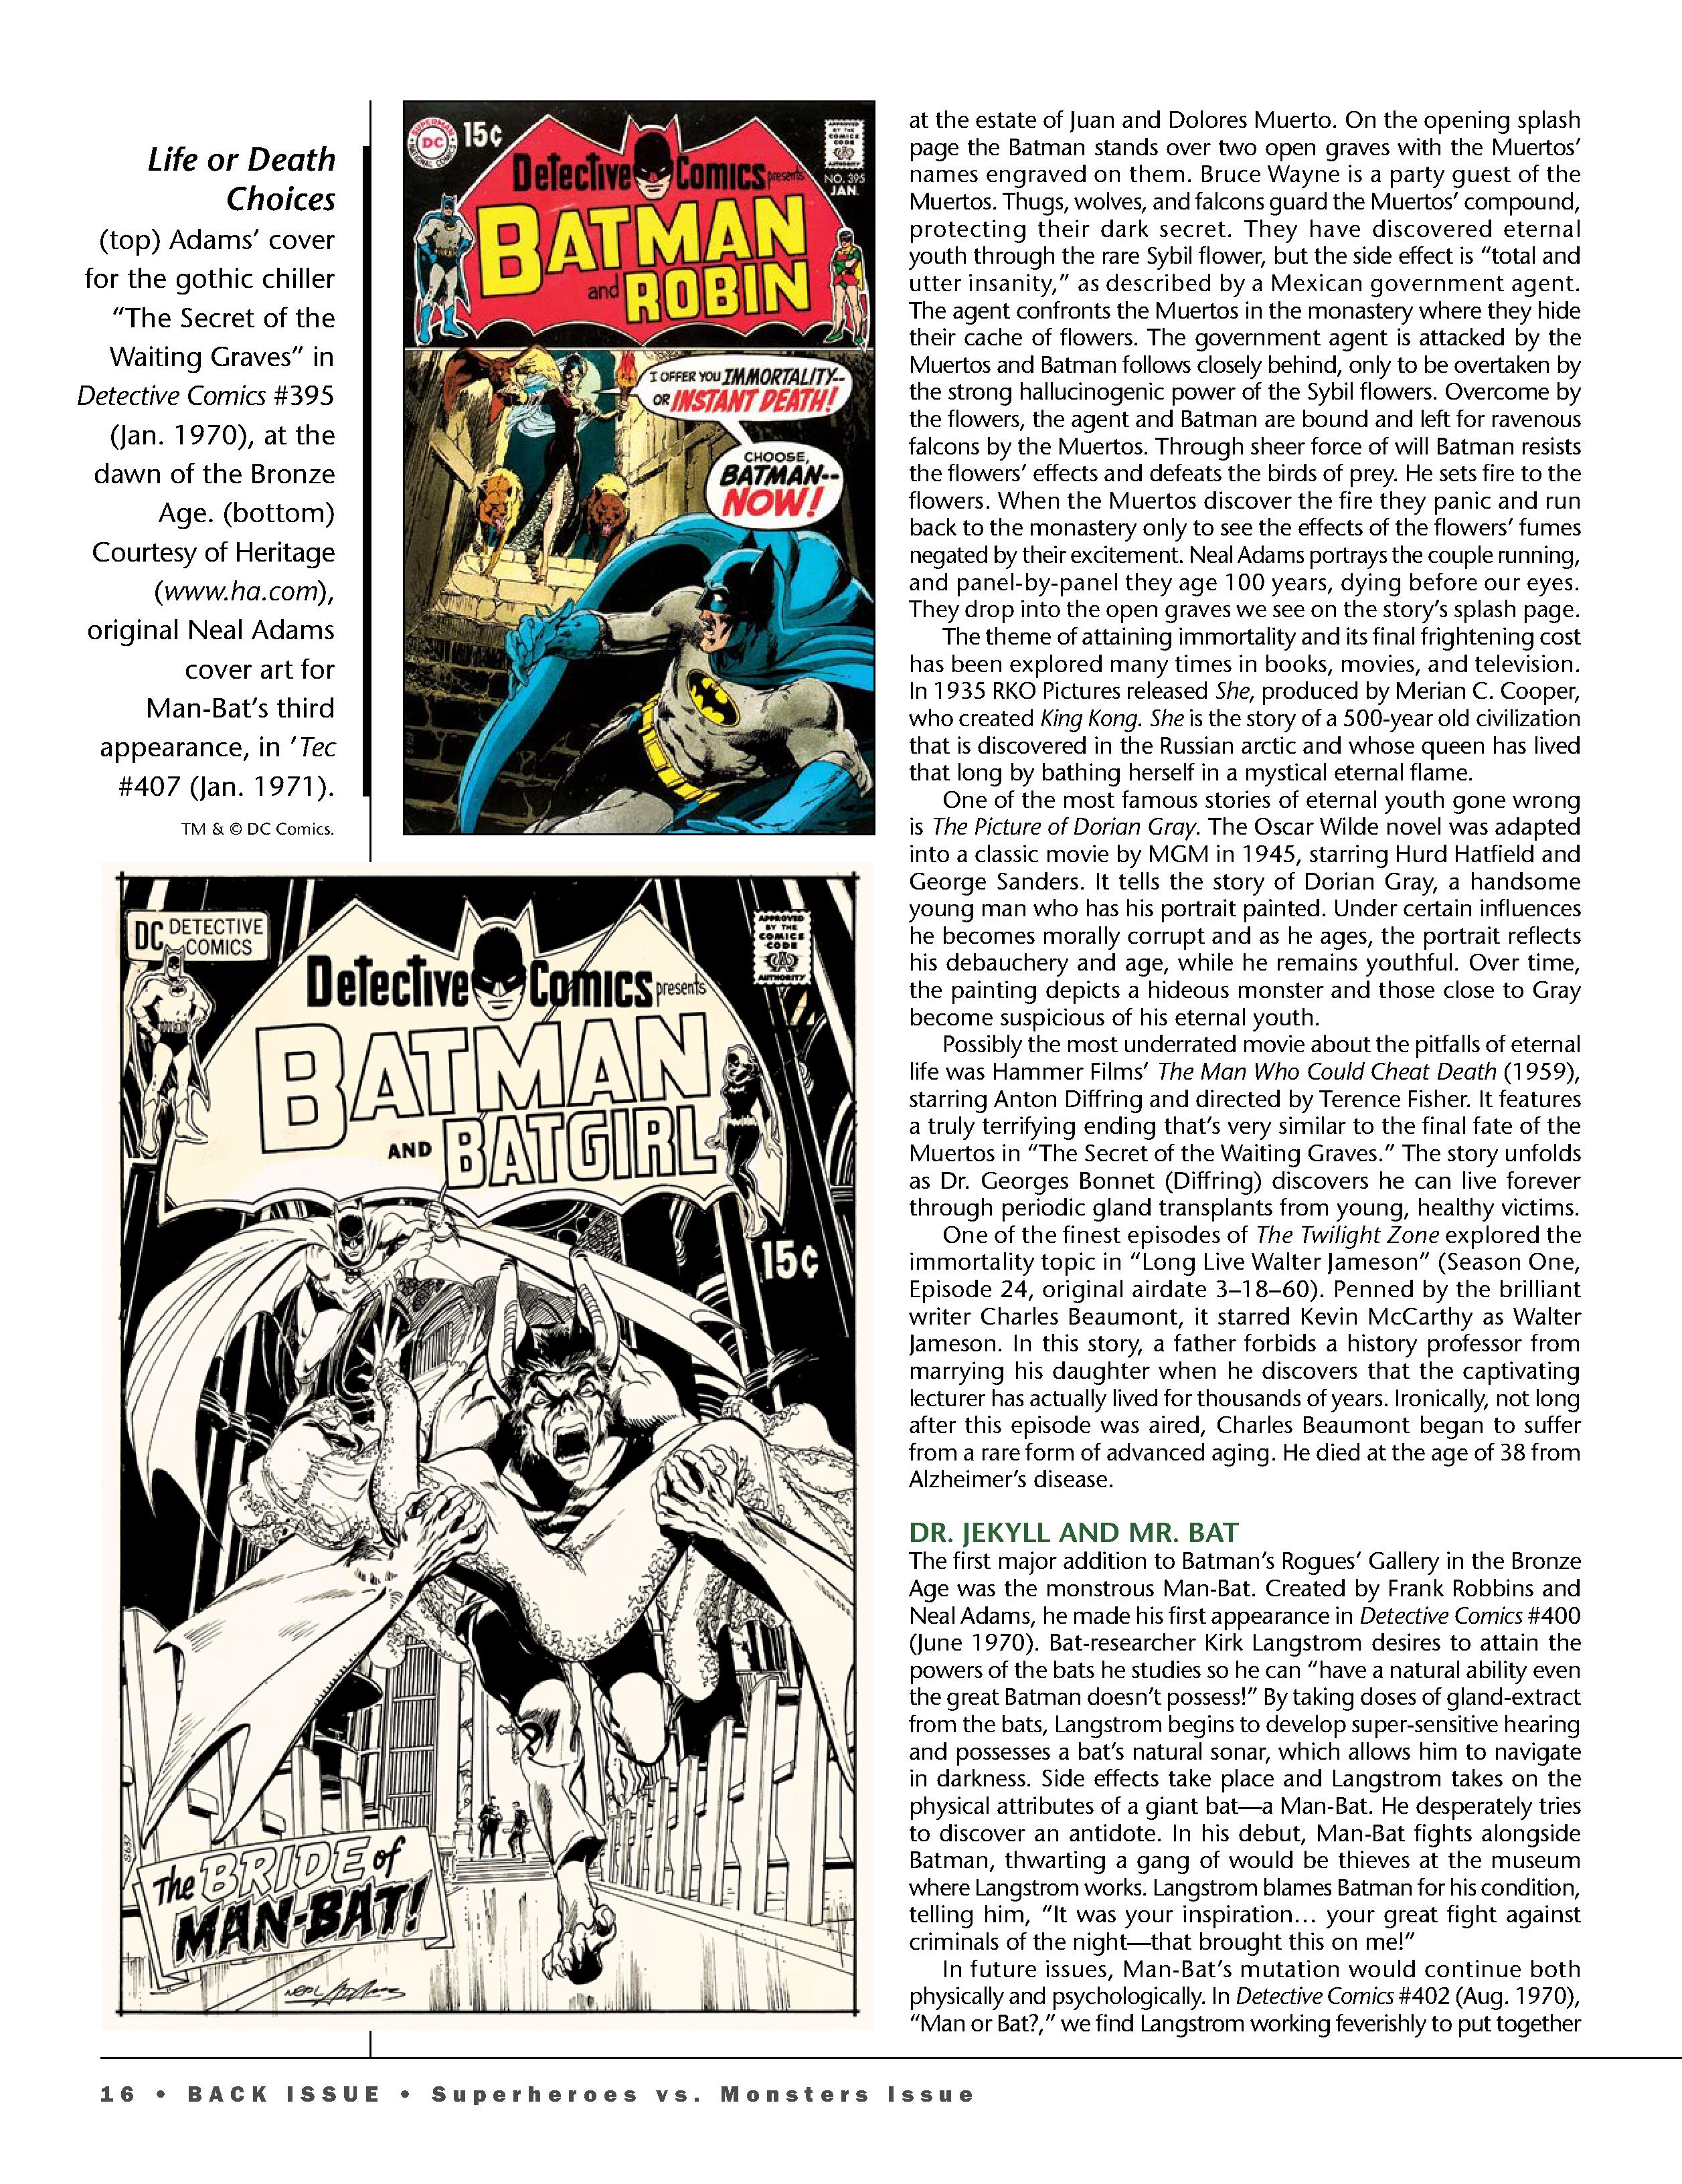 Read online Back Issue comic -  Issue #116 - 18